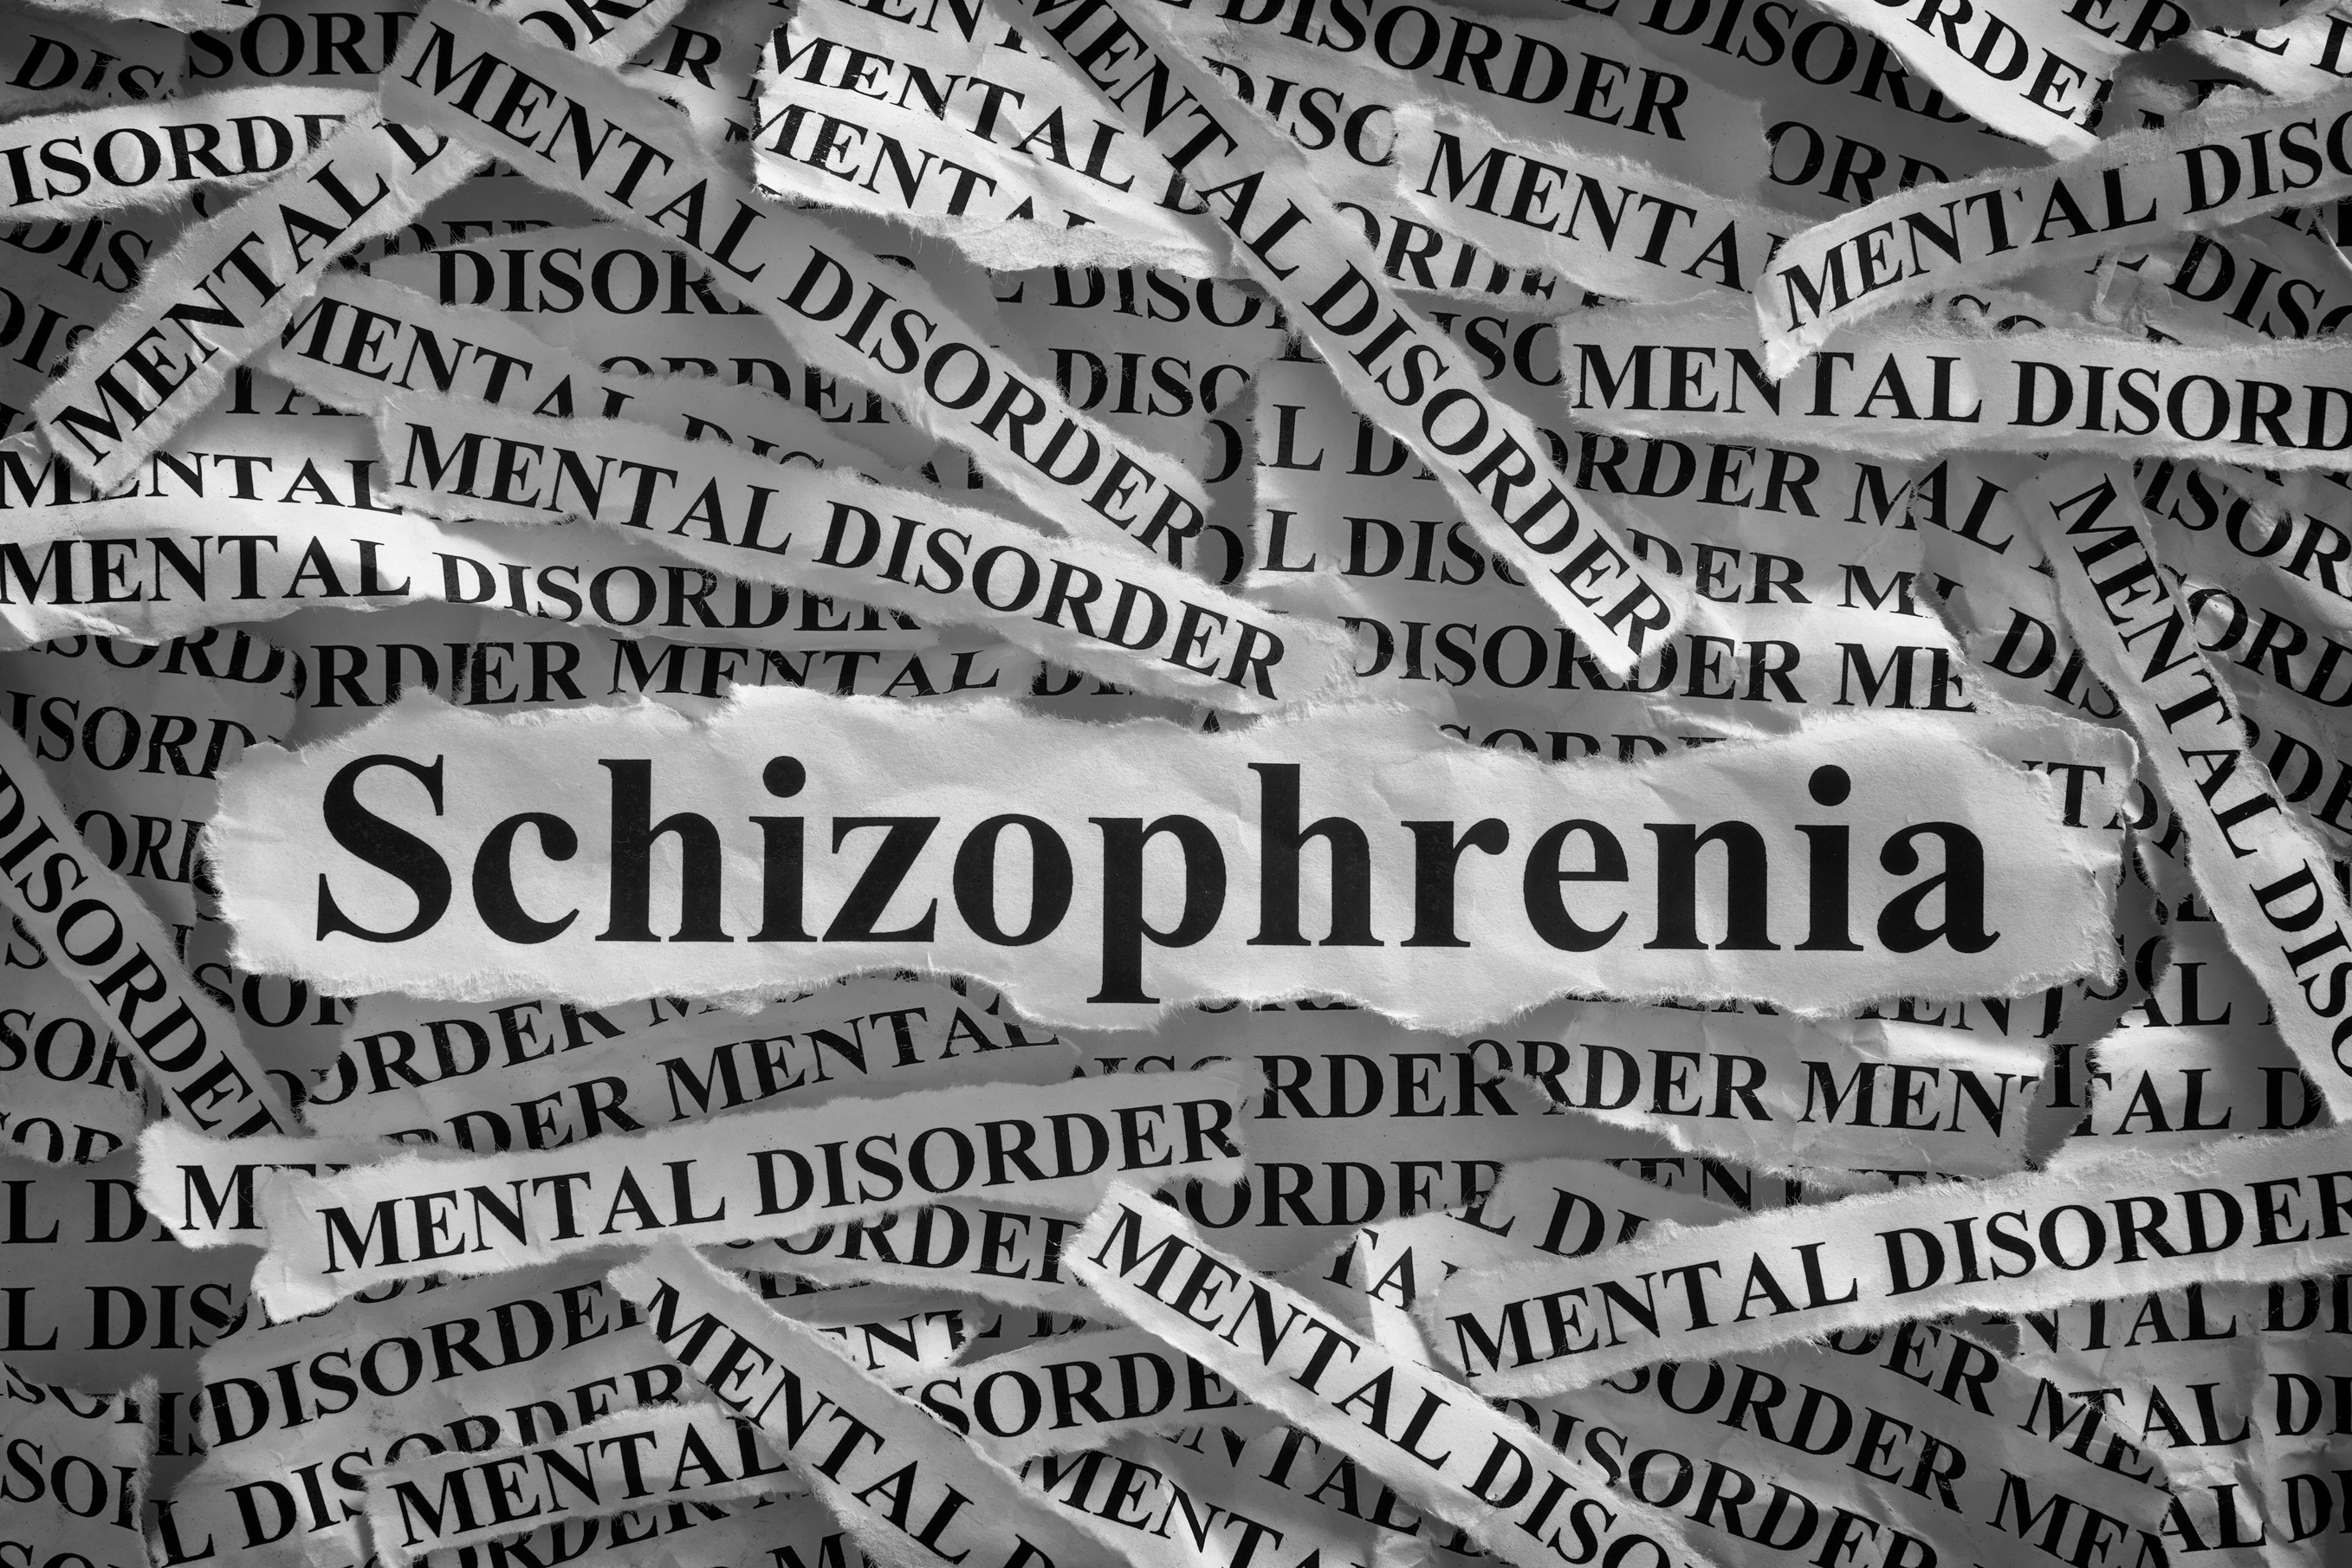 How can I deal with my mother's schizophrenia?